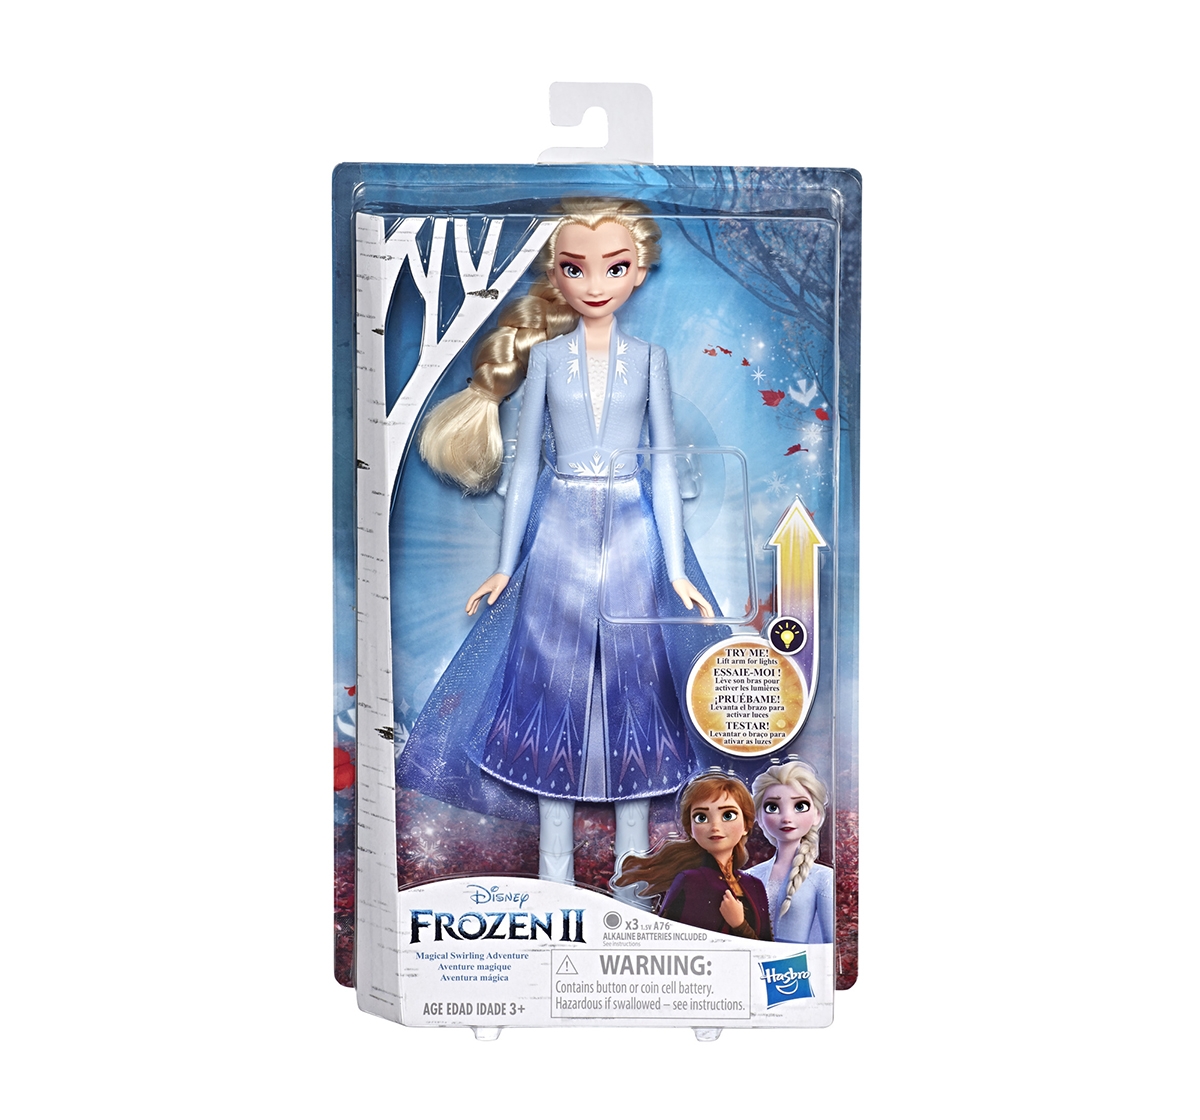 My Little Pony | Disney Frozen Elsa Magical Swirling Adventure Fashion Doll Assorted Dolls & Accessories for Girls age 3Y+ 2